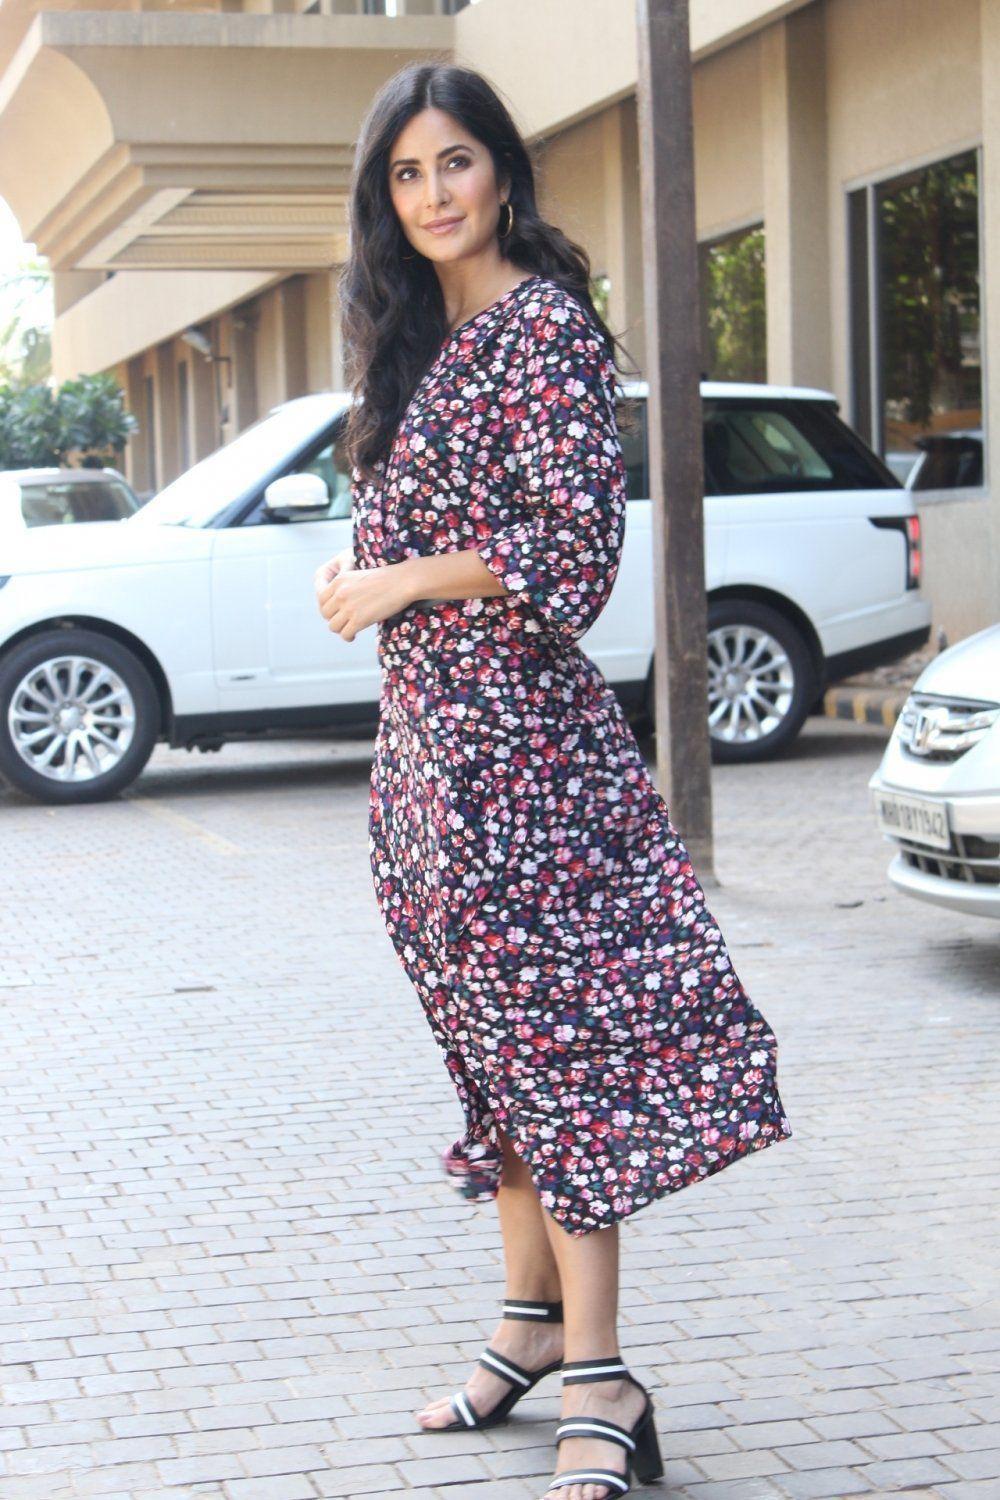 Katrina Kaif during promotions of her upcoming movie Bharat